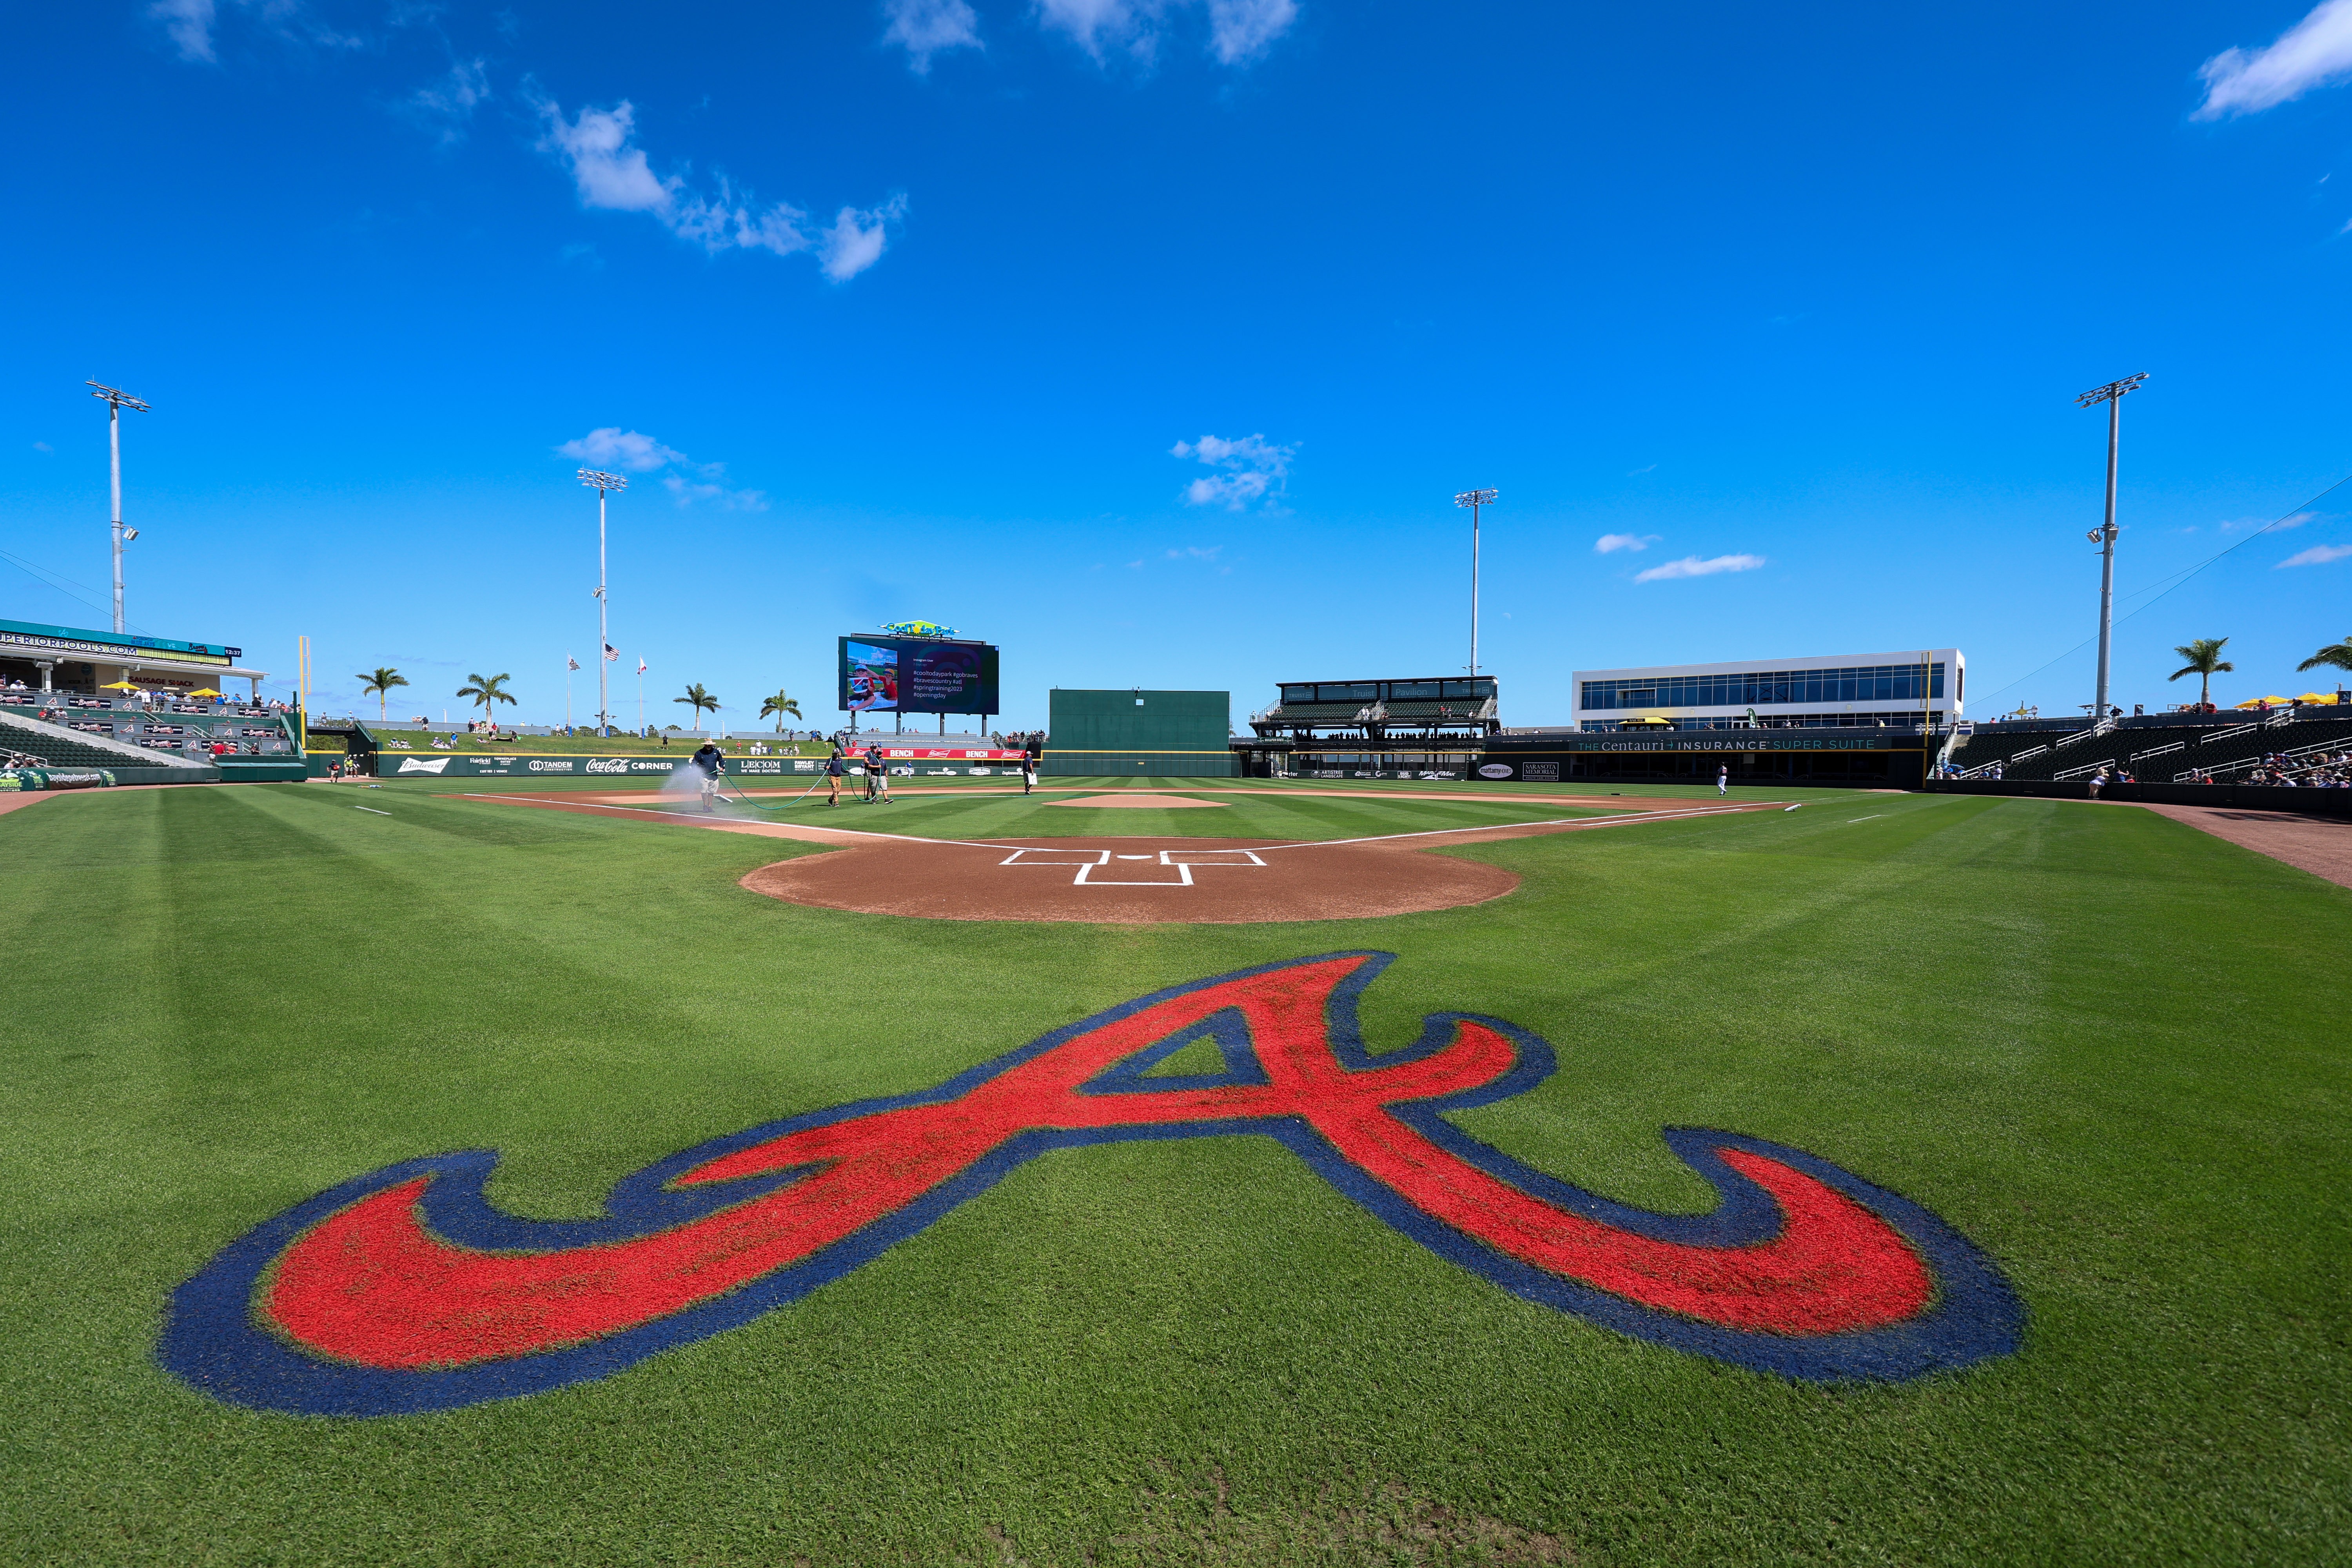 The sights and sounds from Braves opening day at home